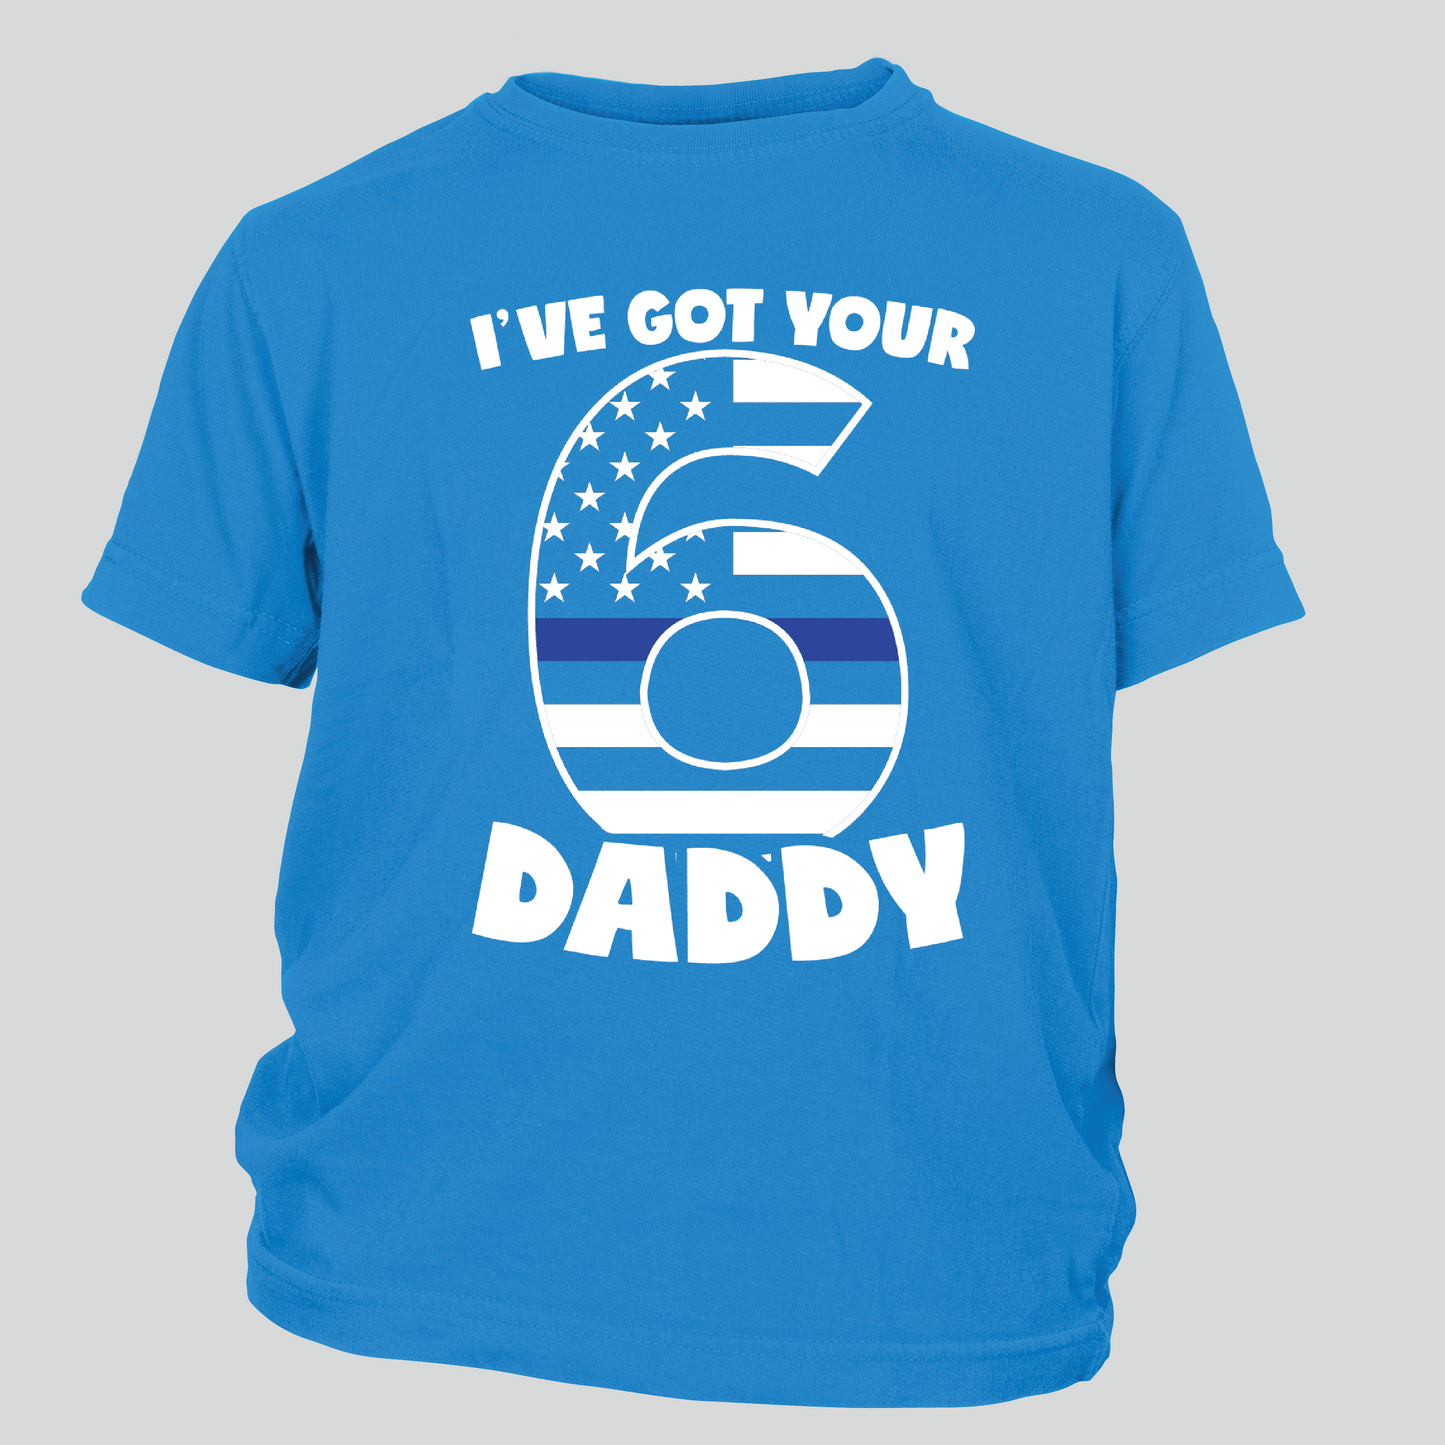 I've Got Your 6 Daddy